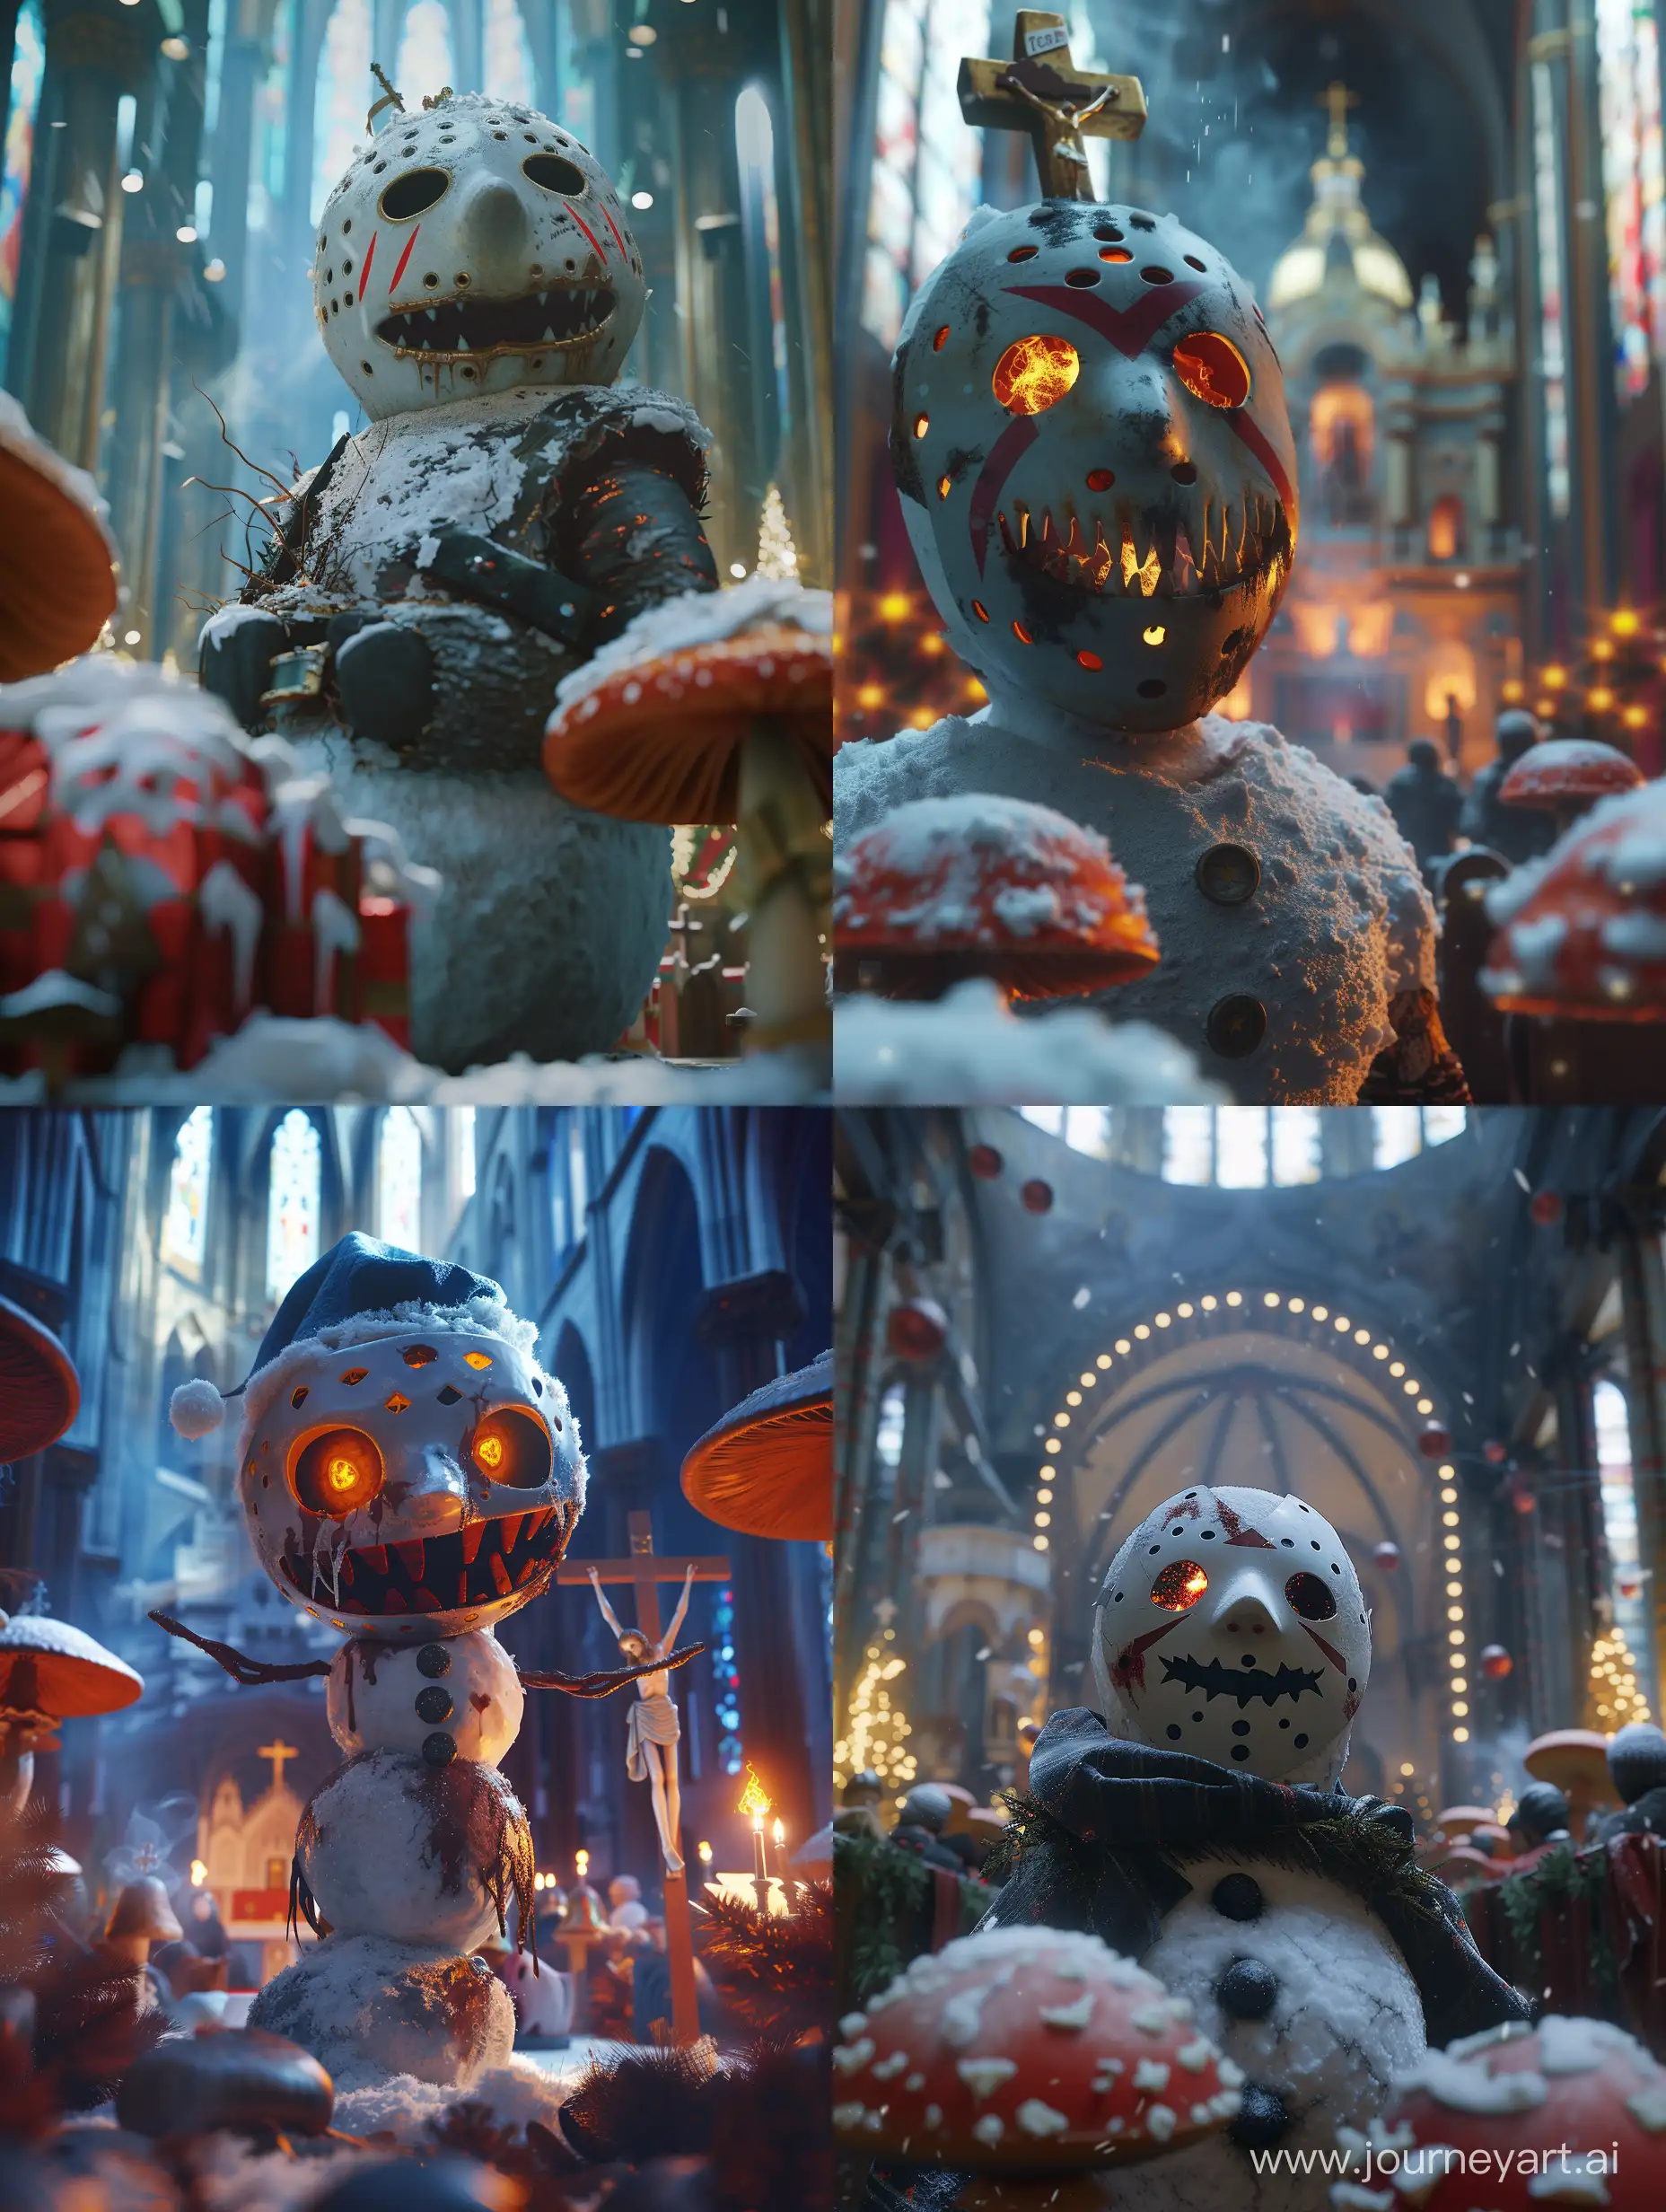 "An abstract representation of desirous hunger and the fire within is depicted through a scary snowman donning a Jason-style mask. The eerie character is illuminated with cinematic lighting, evoking a movie poster in the horror genre. Within the scene, surreal mushrooms lend an otherworldly quality, rendered with Unreal Engine and Octane Render, incorporating an anime style. Meanwhile, inside a grand cathedral, a realistic Christmas church service is taking place, rich with symbolism and the presence of people" s 1000